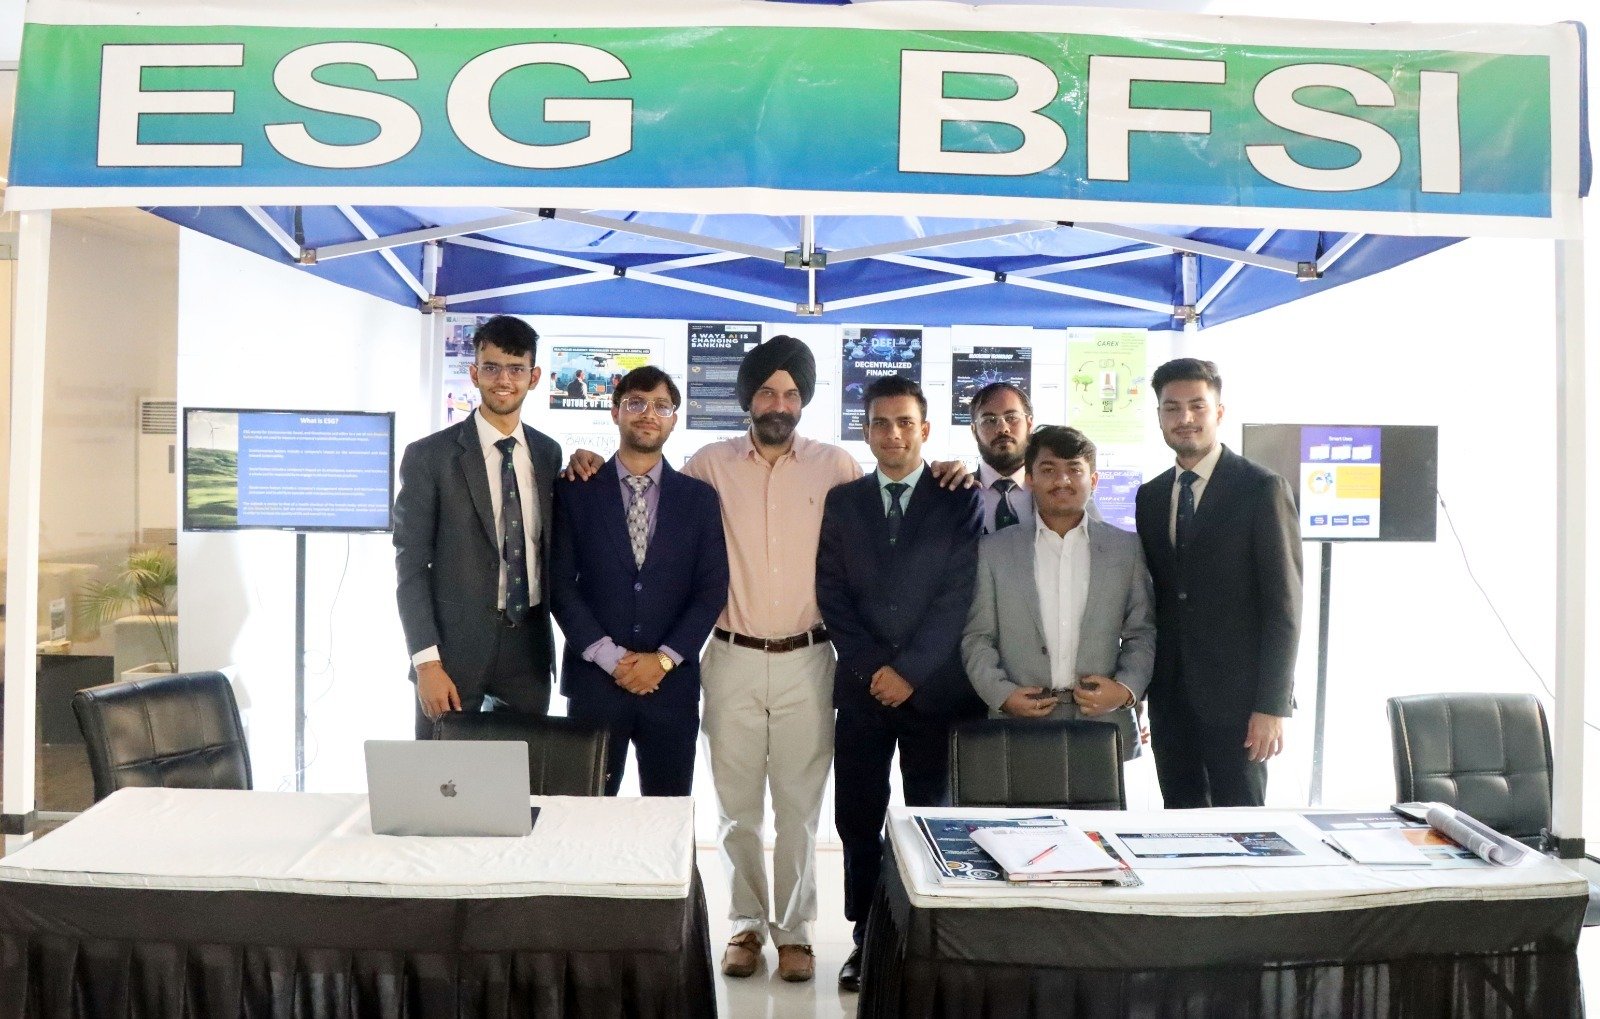 UNIVERSAL AI UNIVERSITY HOSTS SUCCESSFUL NATIONAL SYMPOSIUM ON AI INNOVATIONS IN BFSI